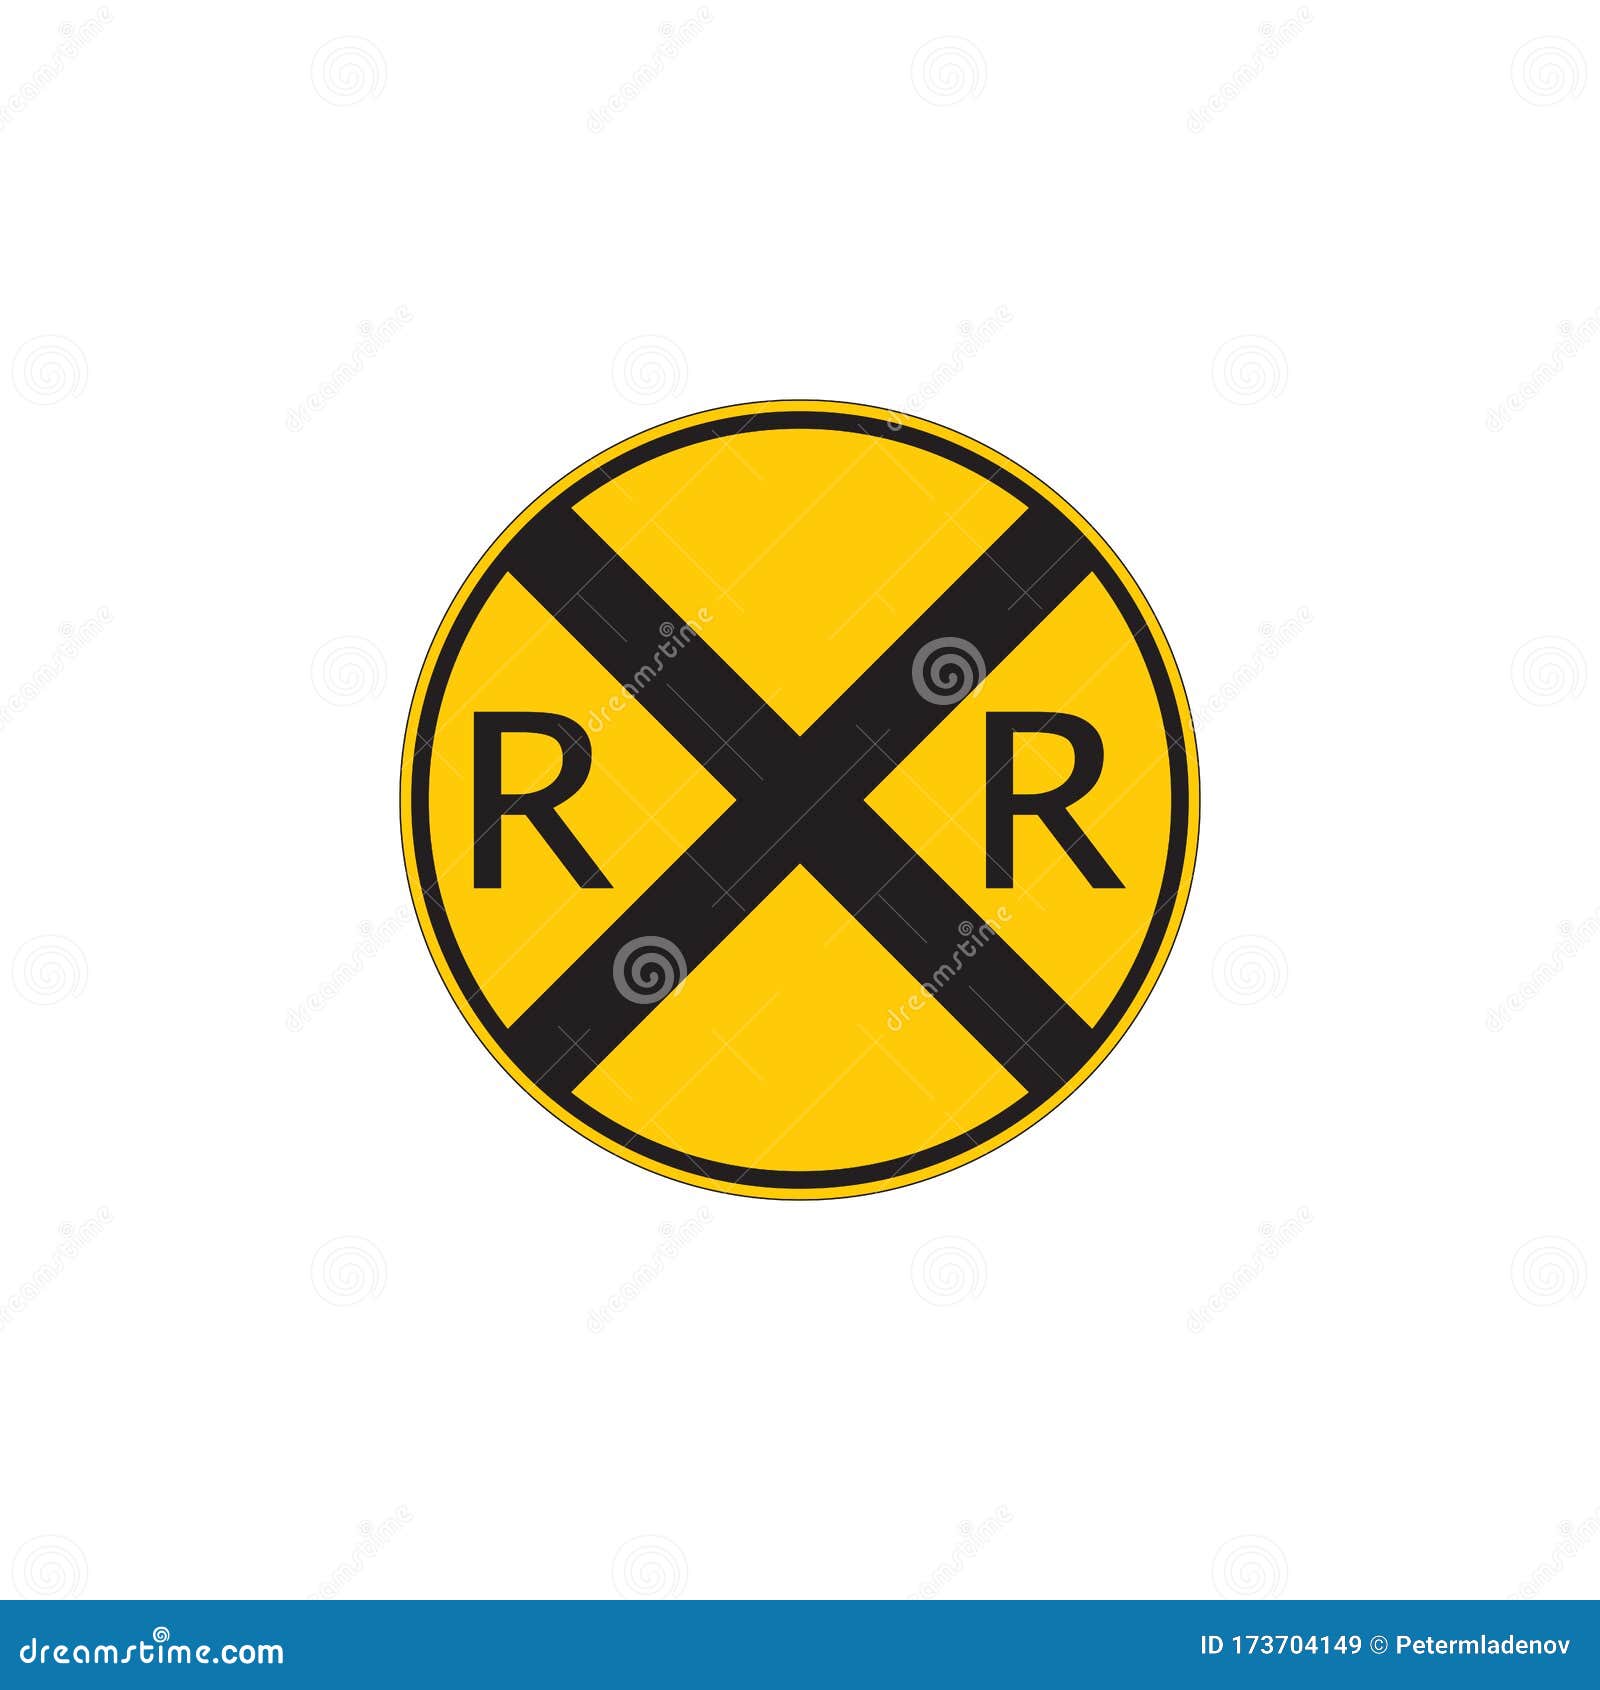 railway or railroad crossing intersection regulatory sign.  .